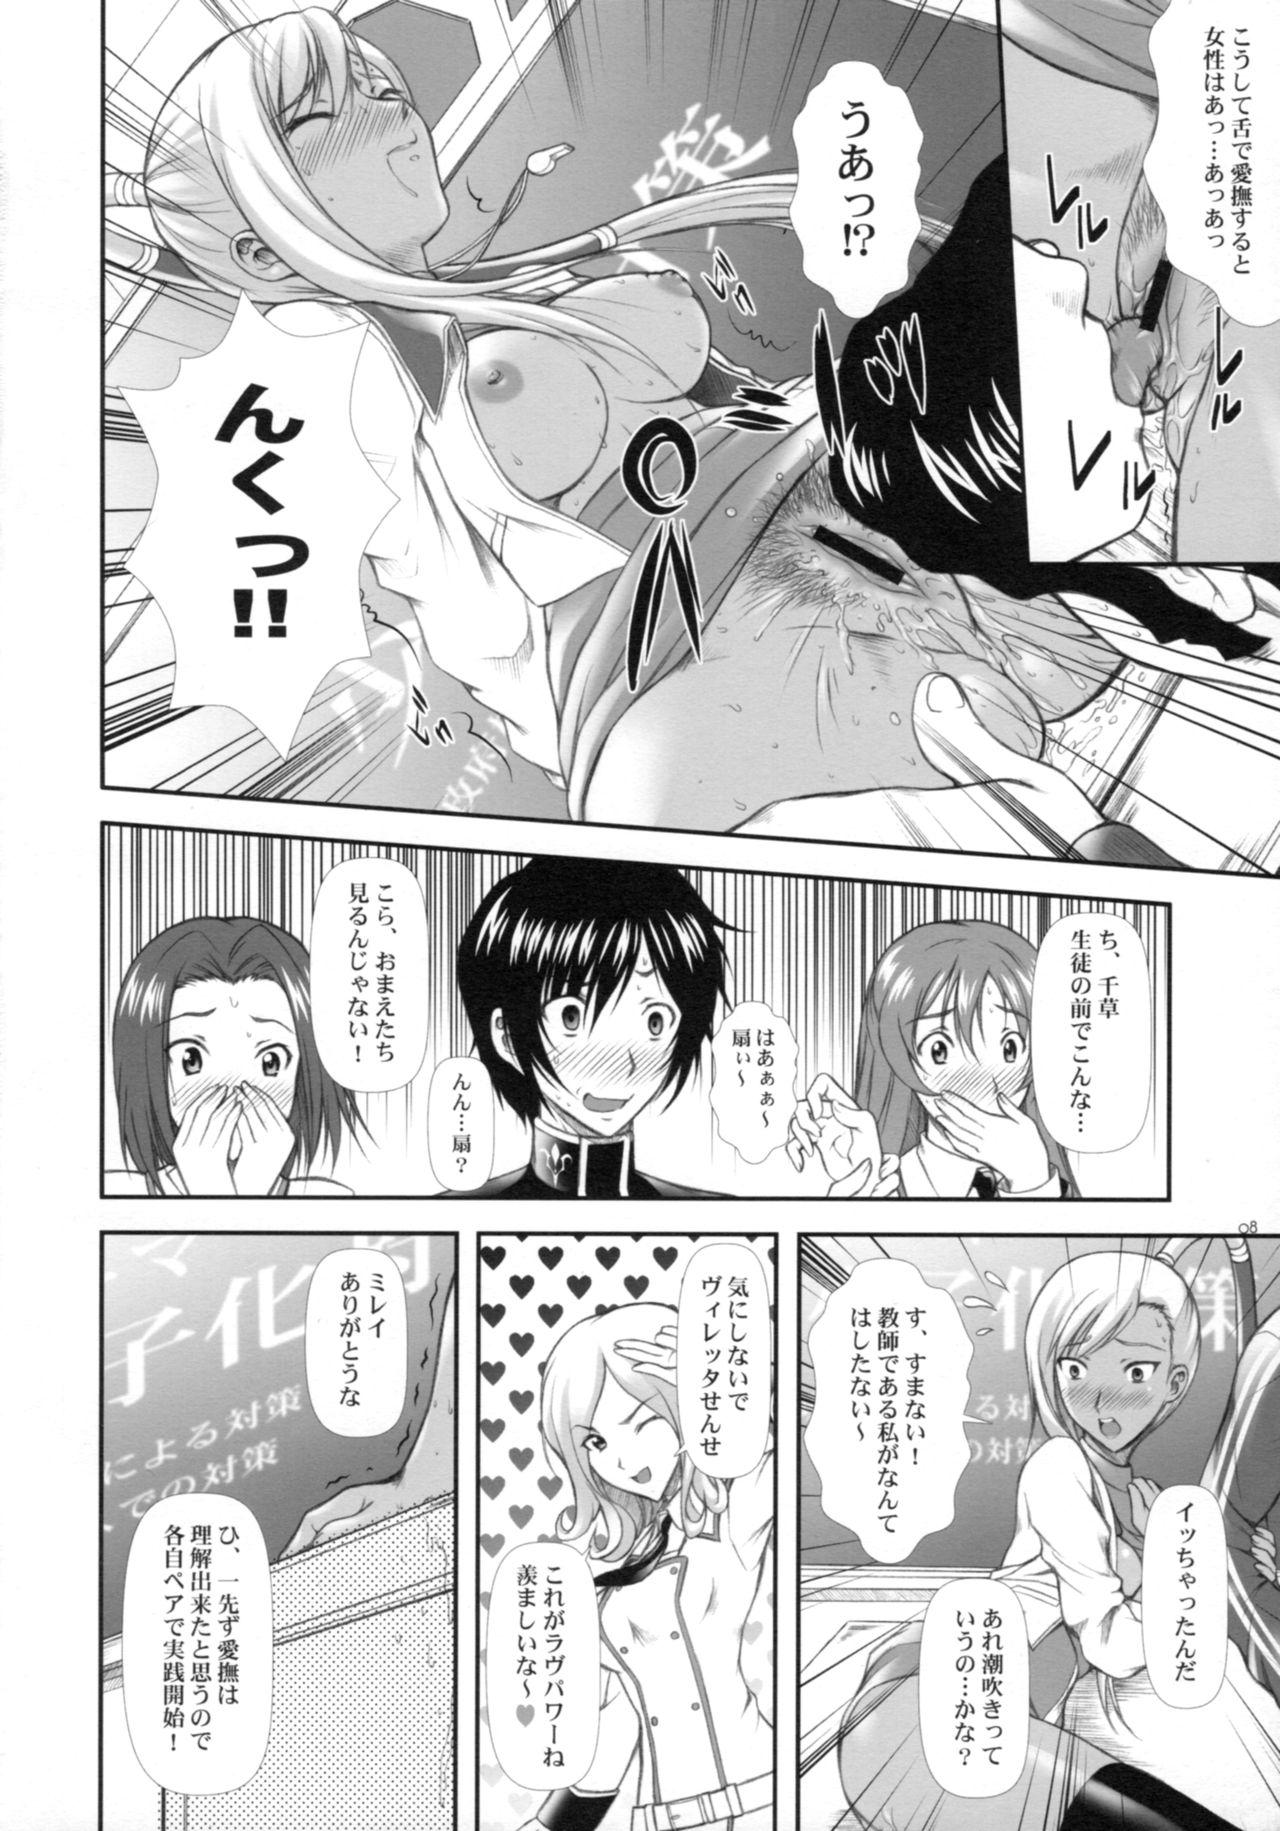 Chica Campus Mission COMIKET 74 Kaijou Gentei Bon - Code geass Ballbusting - Page 7